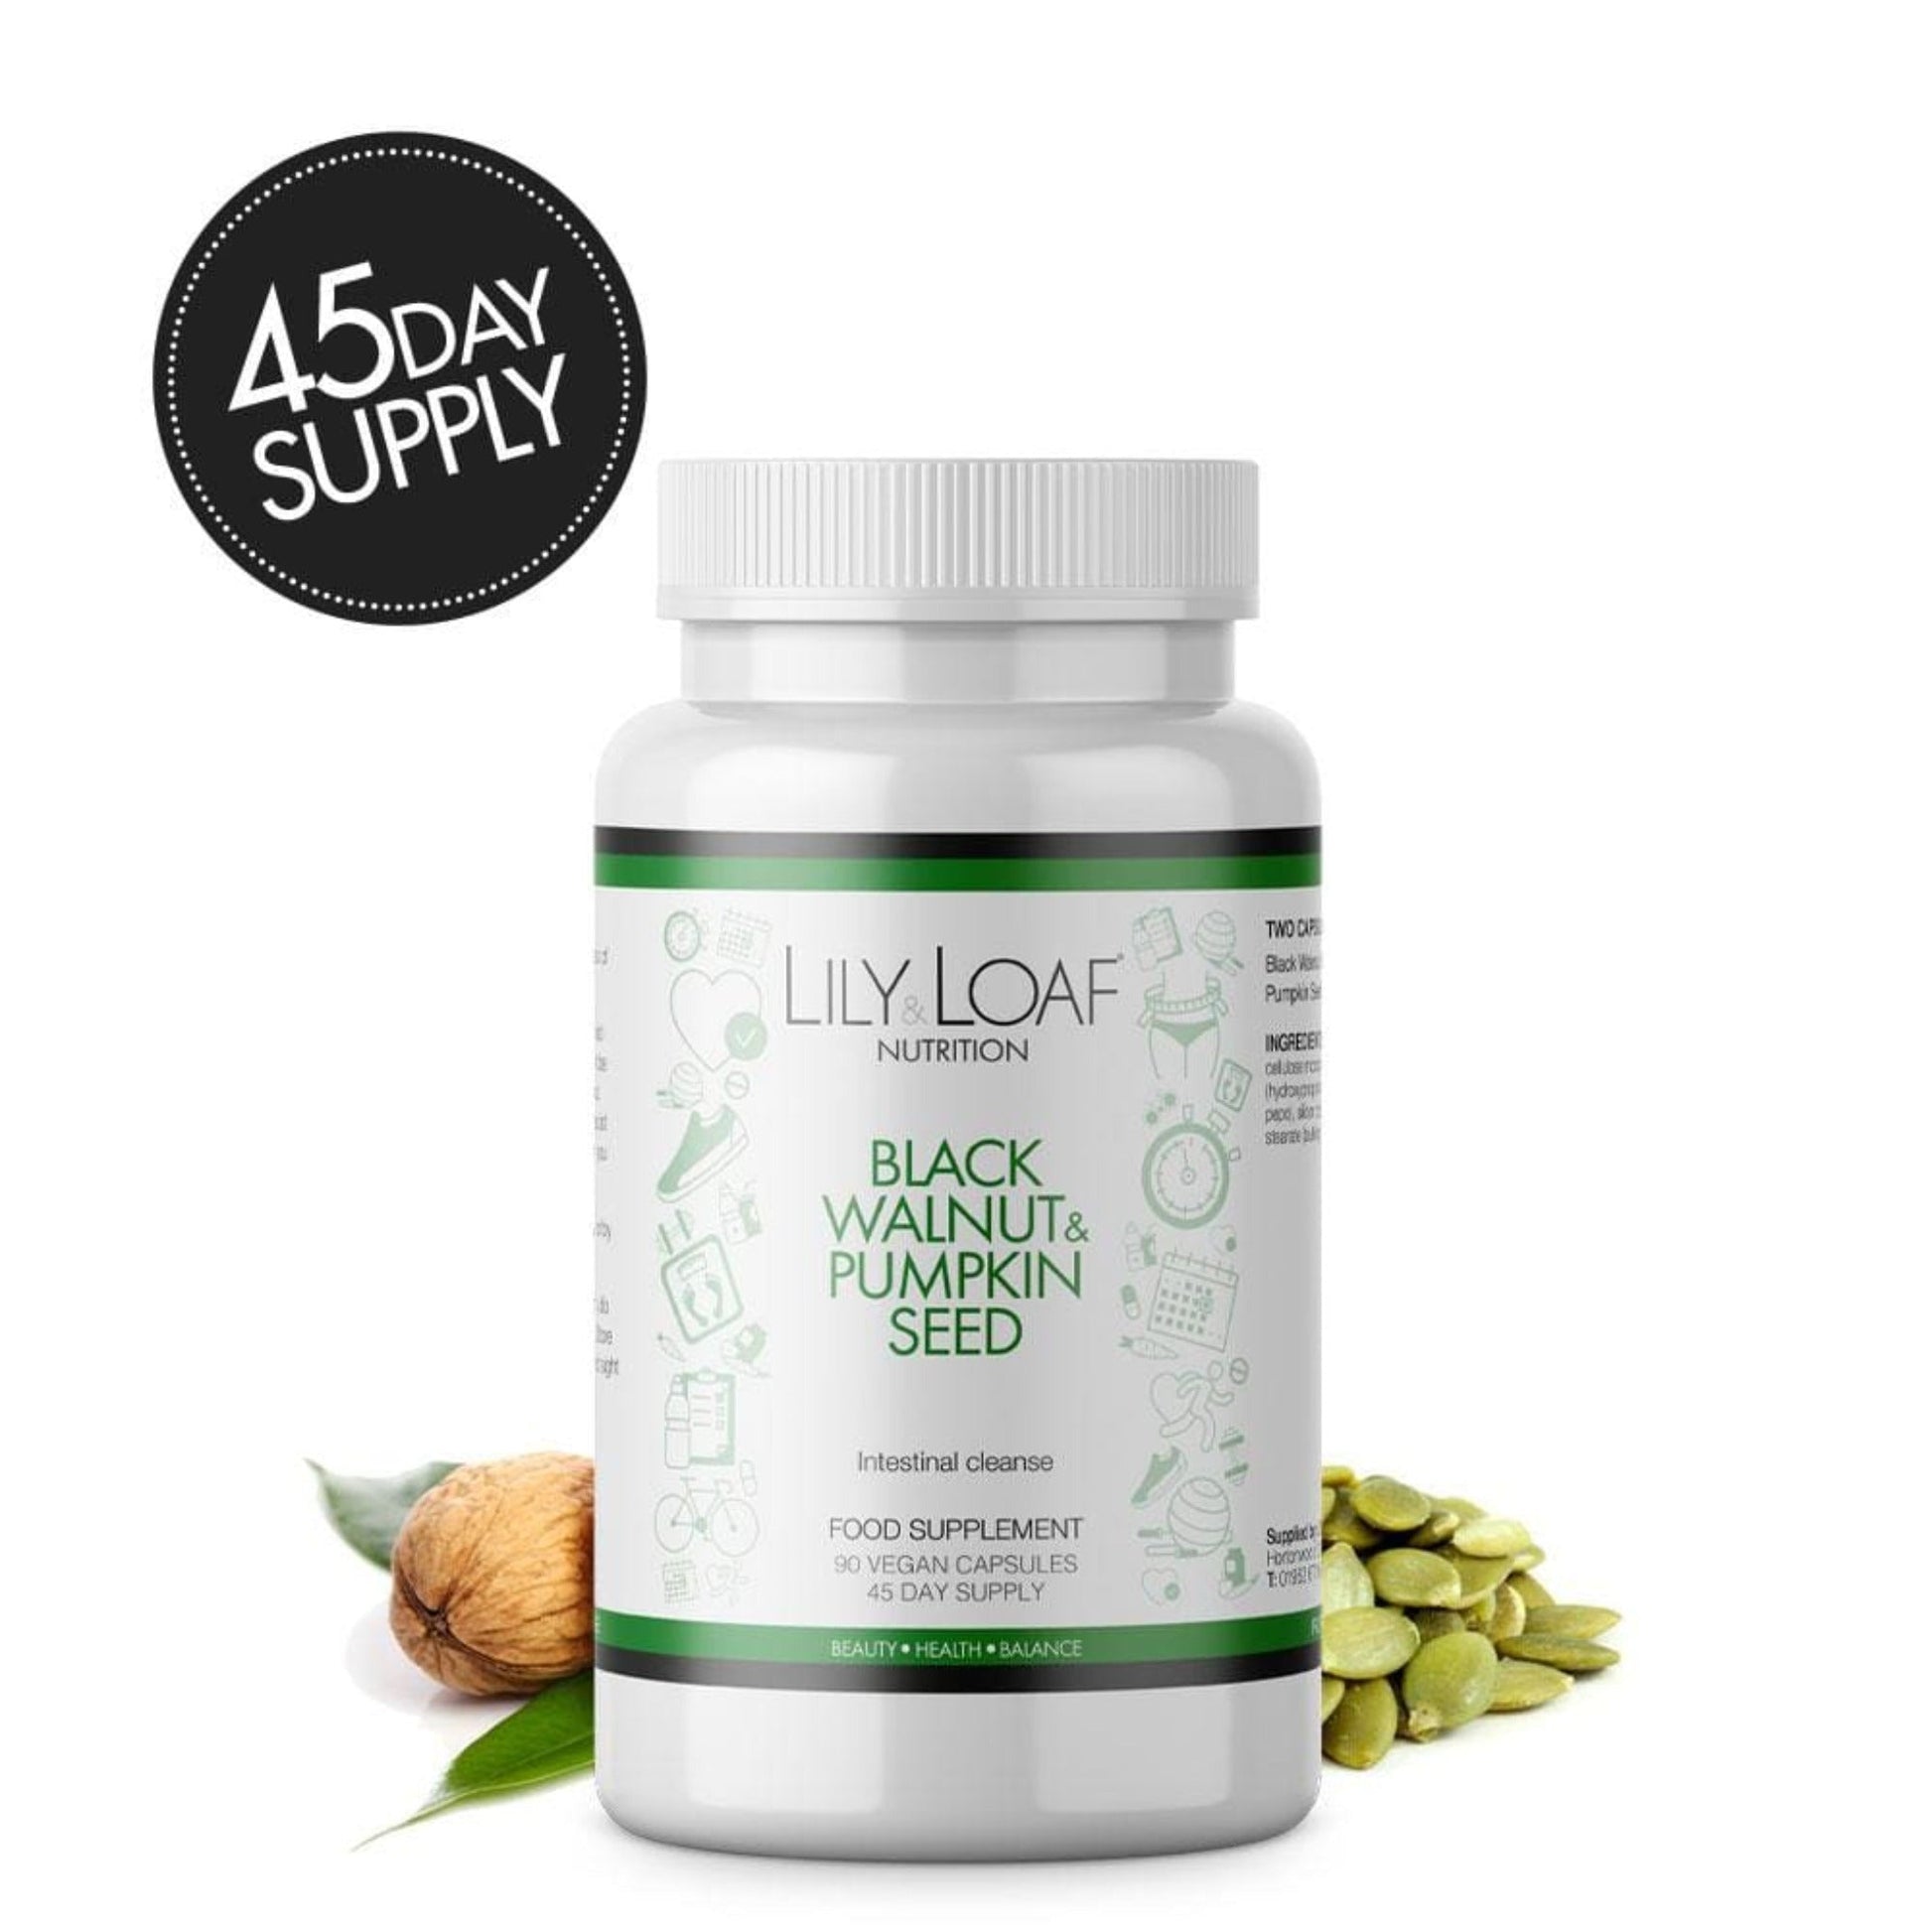 Lily & Loaf Black Walnut & Pumpkin Seed Intestinal Cleanse with ingredients at the base of the product